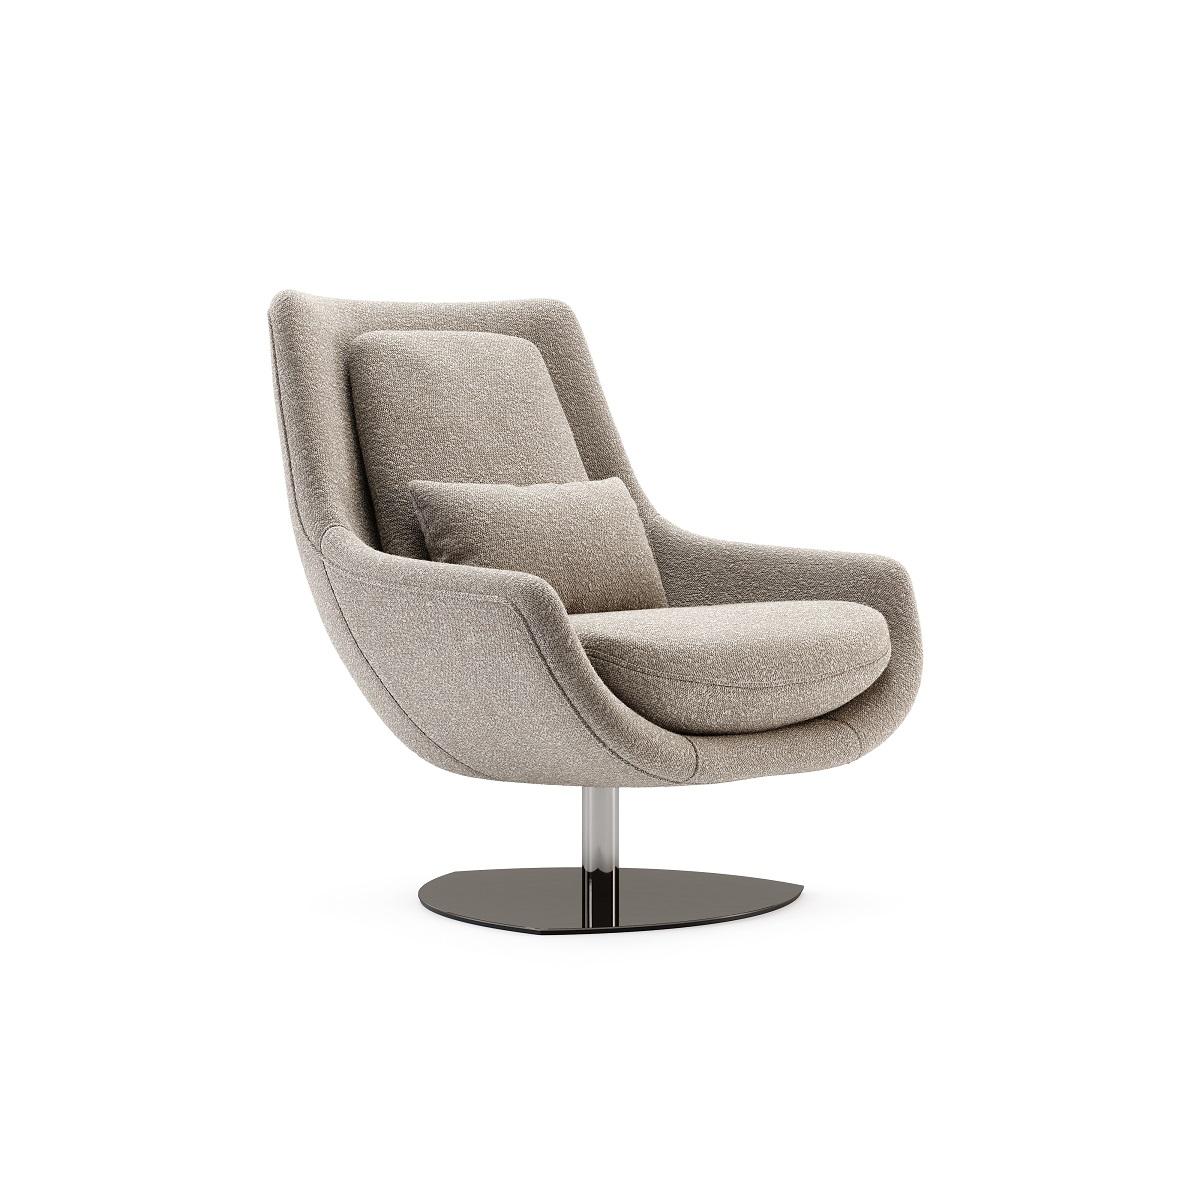 Swivel Armchair W Ottoman in Leather & Polished Stainless Steel 12